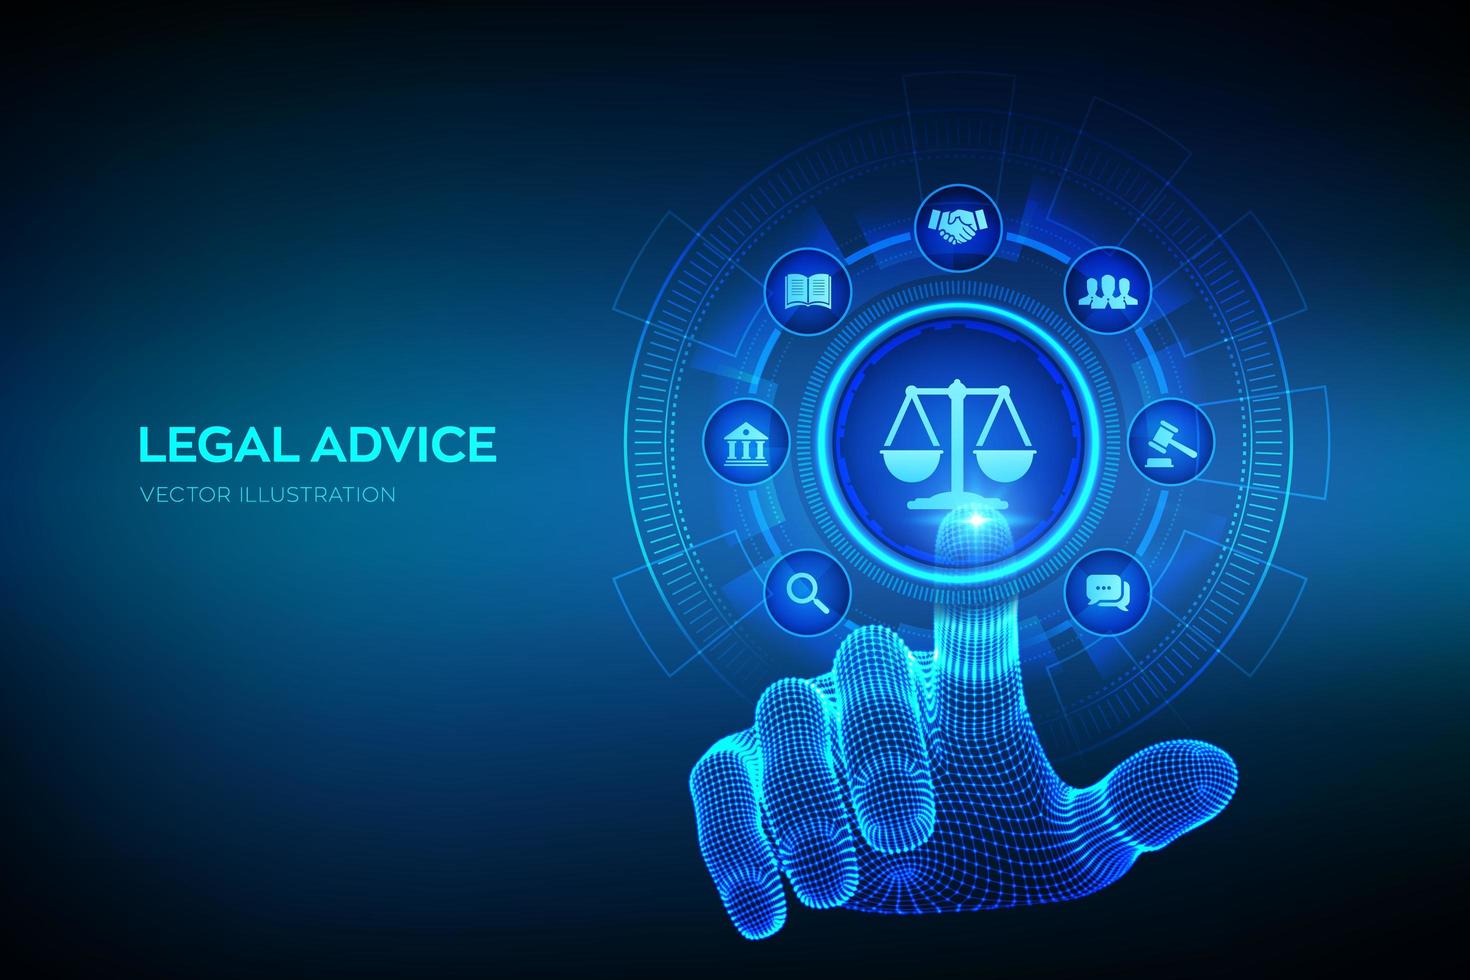 Labor law, Lawyer, Attorney at law, Legal advice concept on virtual screen. Internet law and cyberlaw as digital legal services or online lawyer advice. Hand touching digital interface. vector